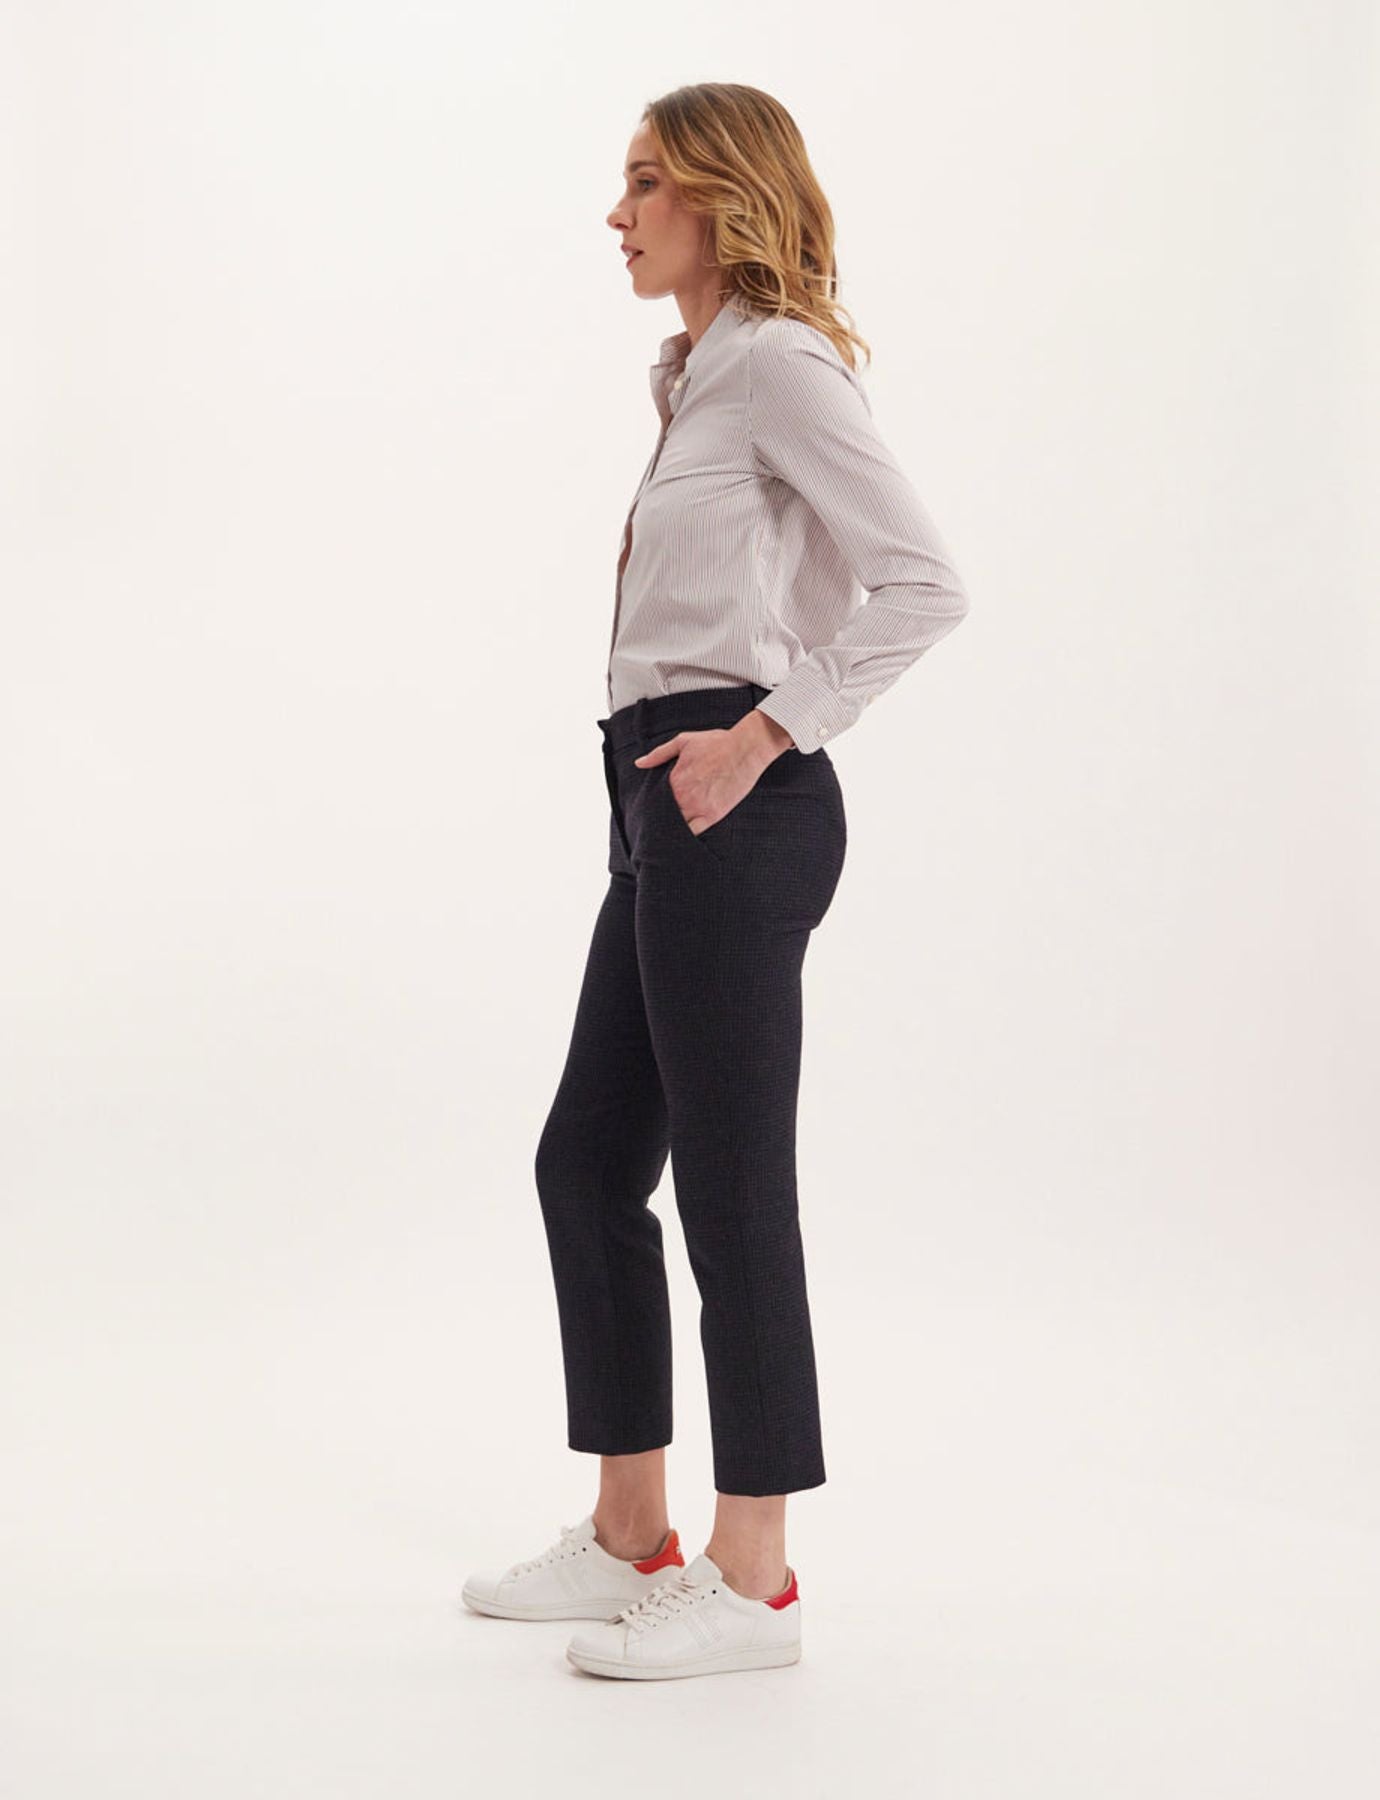 trousers-audrey-black-and-blue